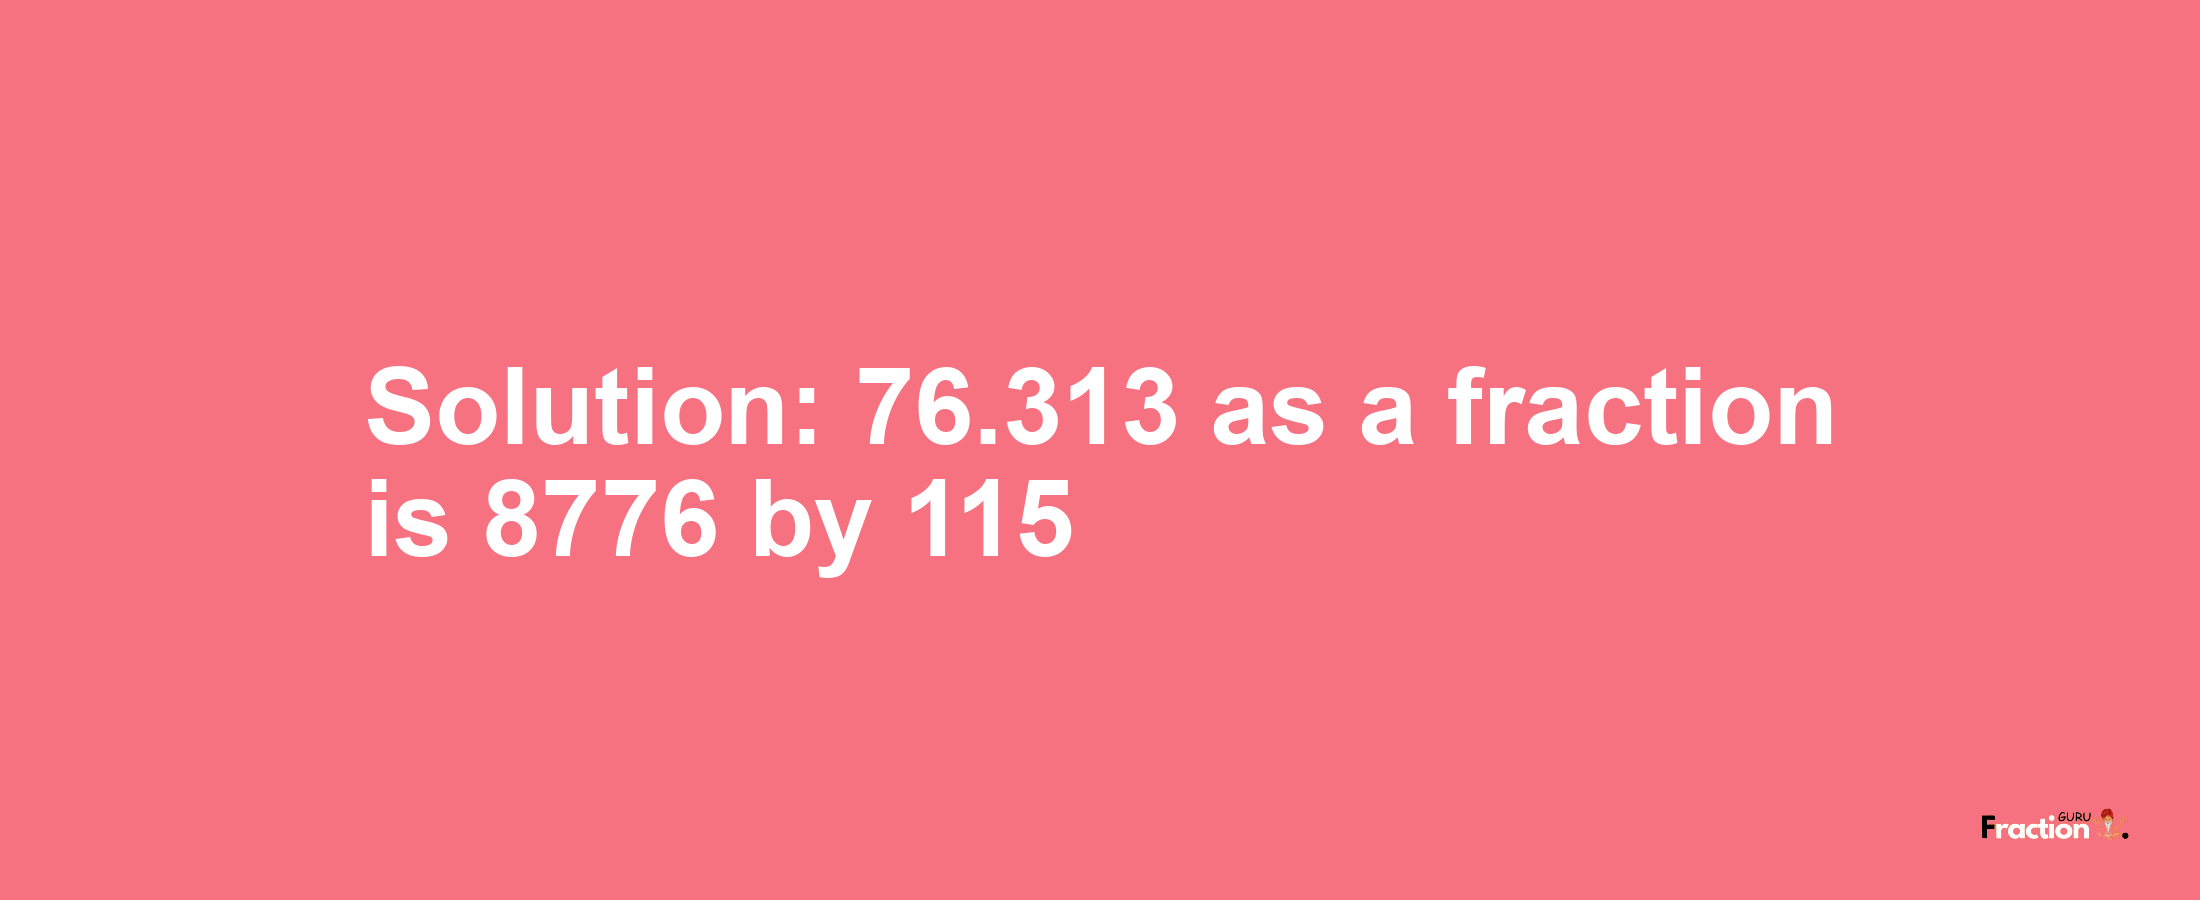 Solution:76.313 as a fraction is 8776/115